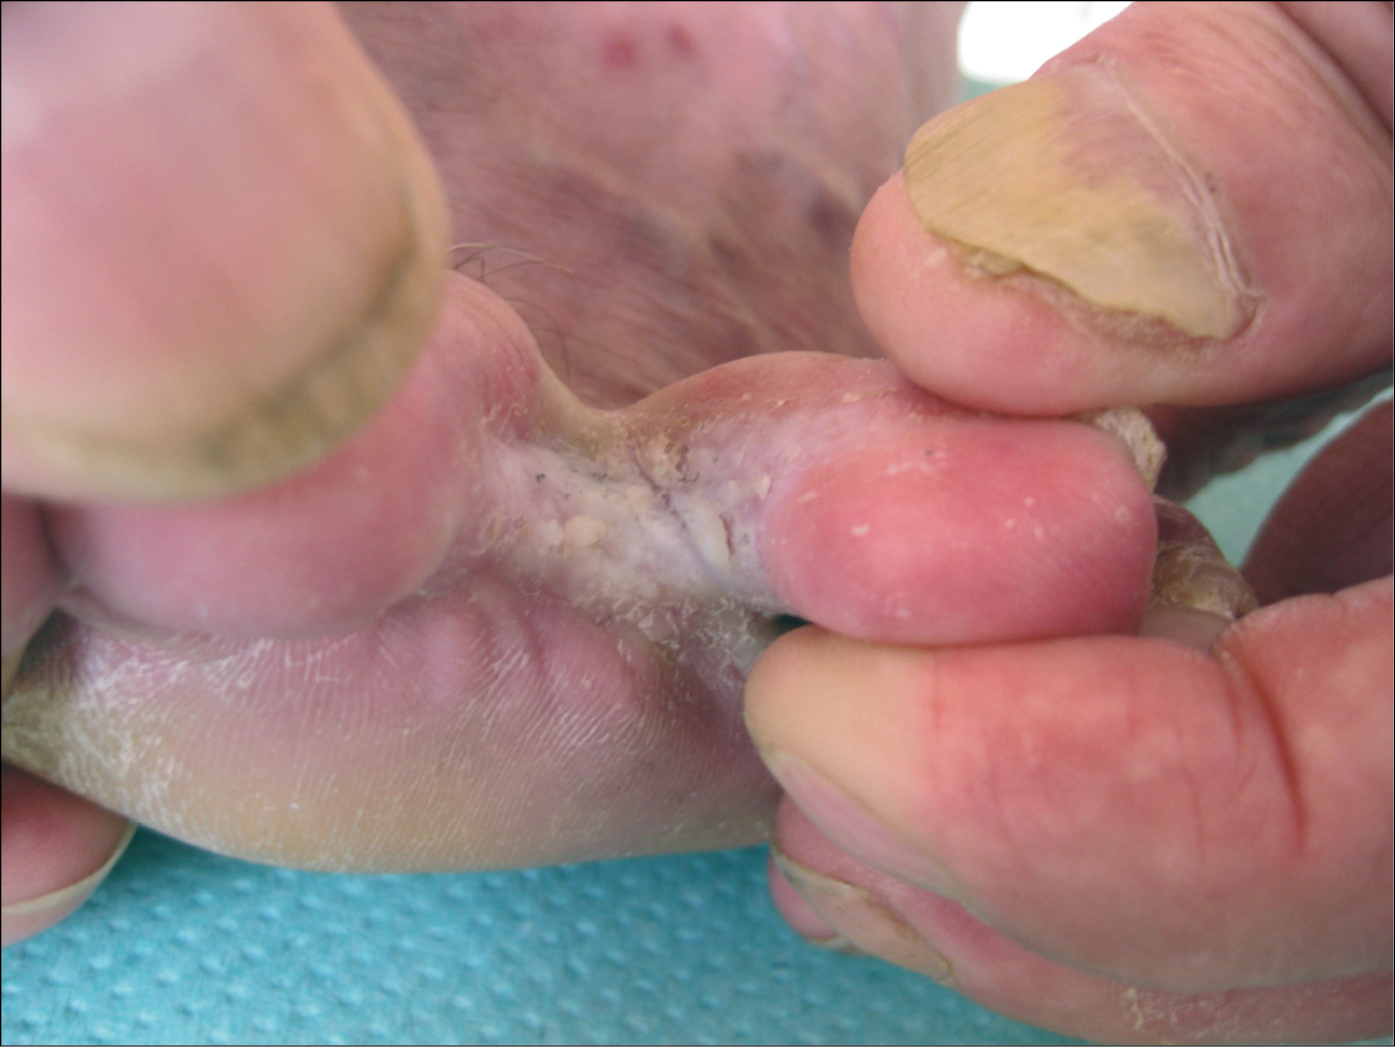 Figure 031_3294.  Interdigital foot mycosis. Maceration and scaling of the epidermis in the interdigital spaces. Secondary hand onychomycosis. Thickened, brittle nail plate of the thumb, keratinization of the nail bed, altered plate color (whitening). 